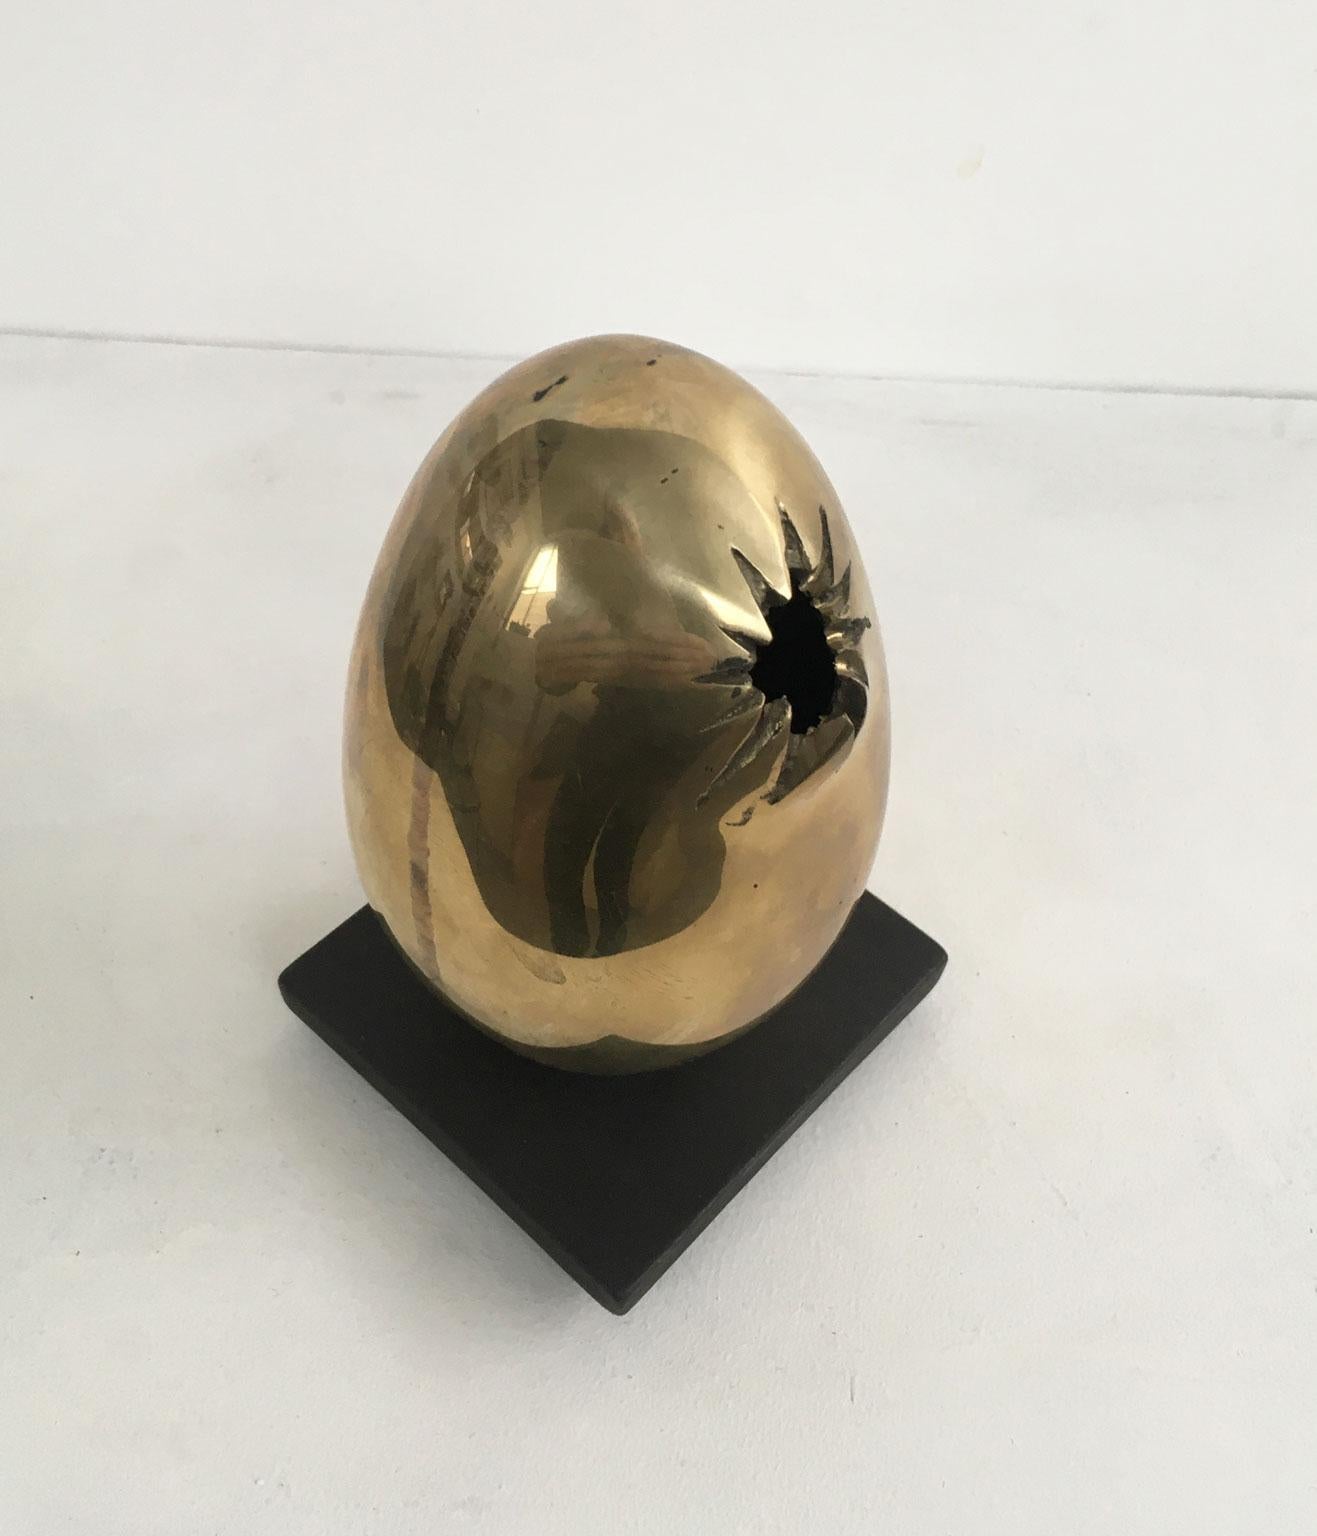 1978 Italy Bronze Abstract Sculpture by Fanna Roncoroni Forma Ovale Oval Shape For Sale 4